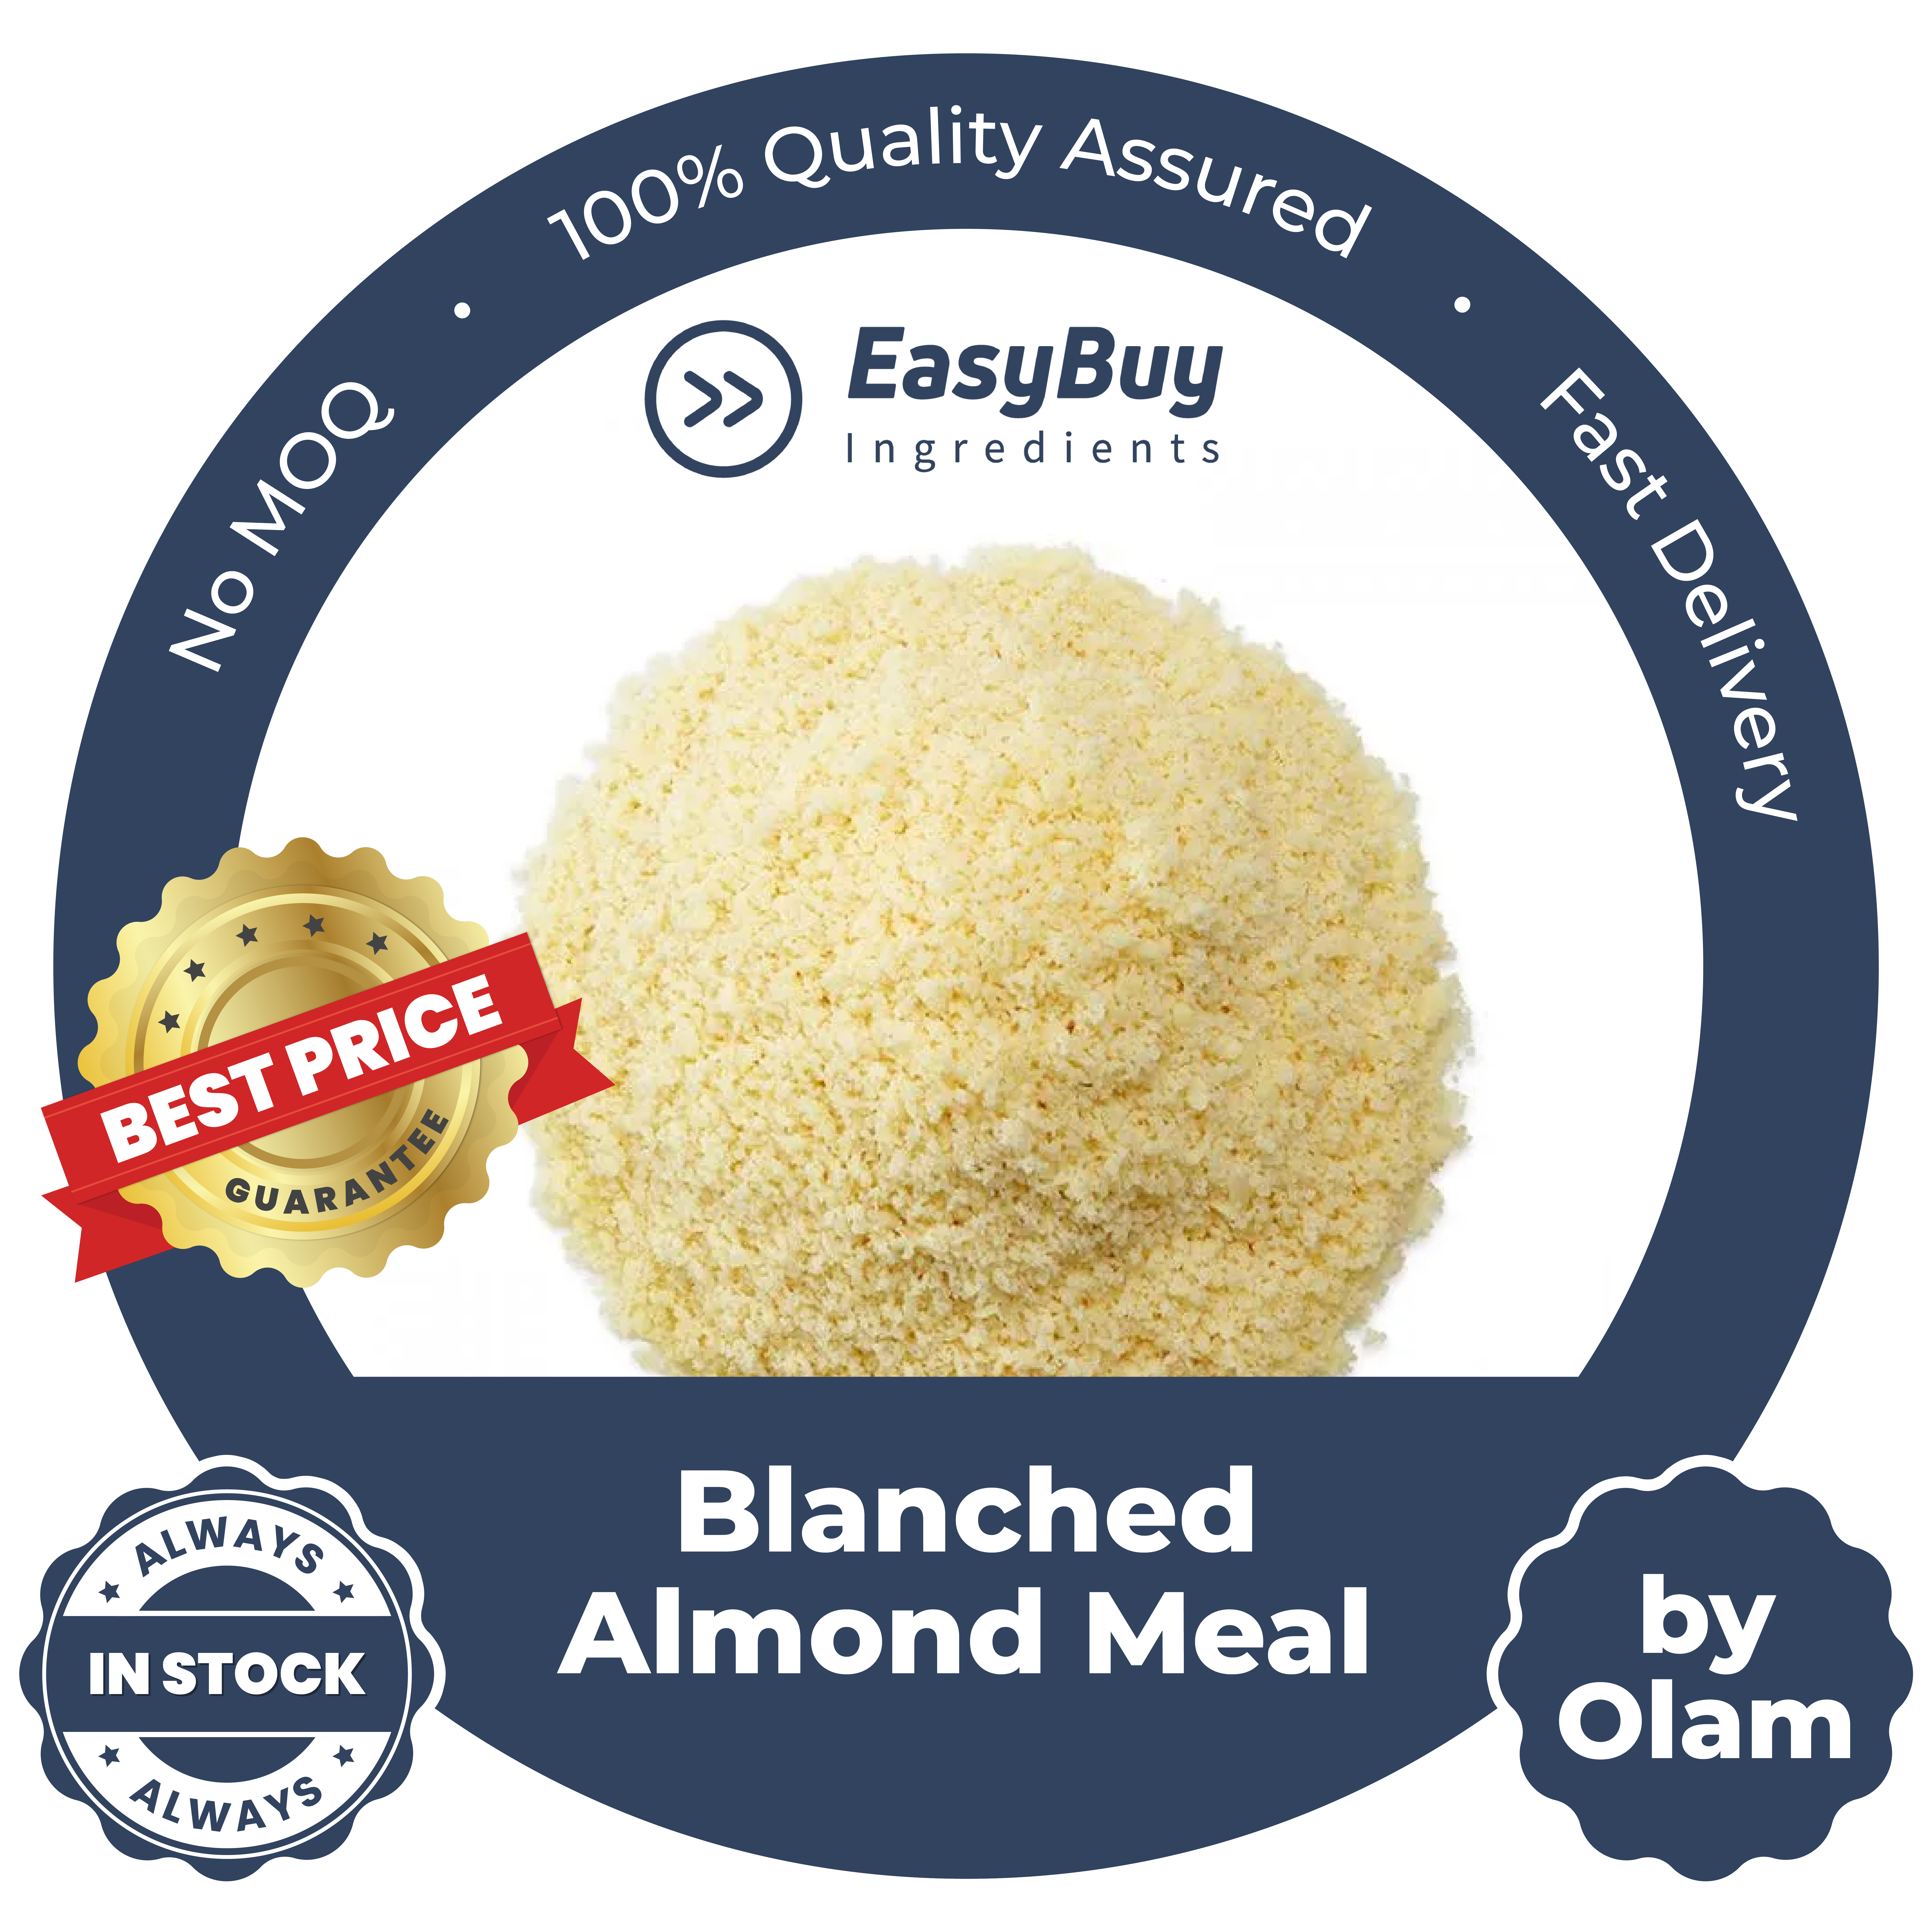 Blanched Almond Meal by Olam